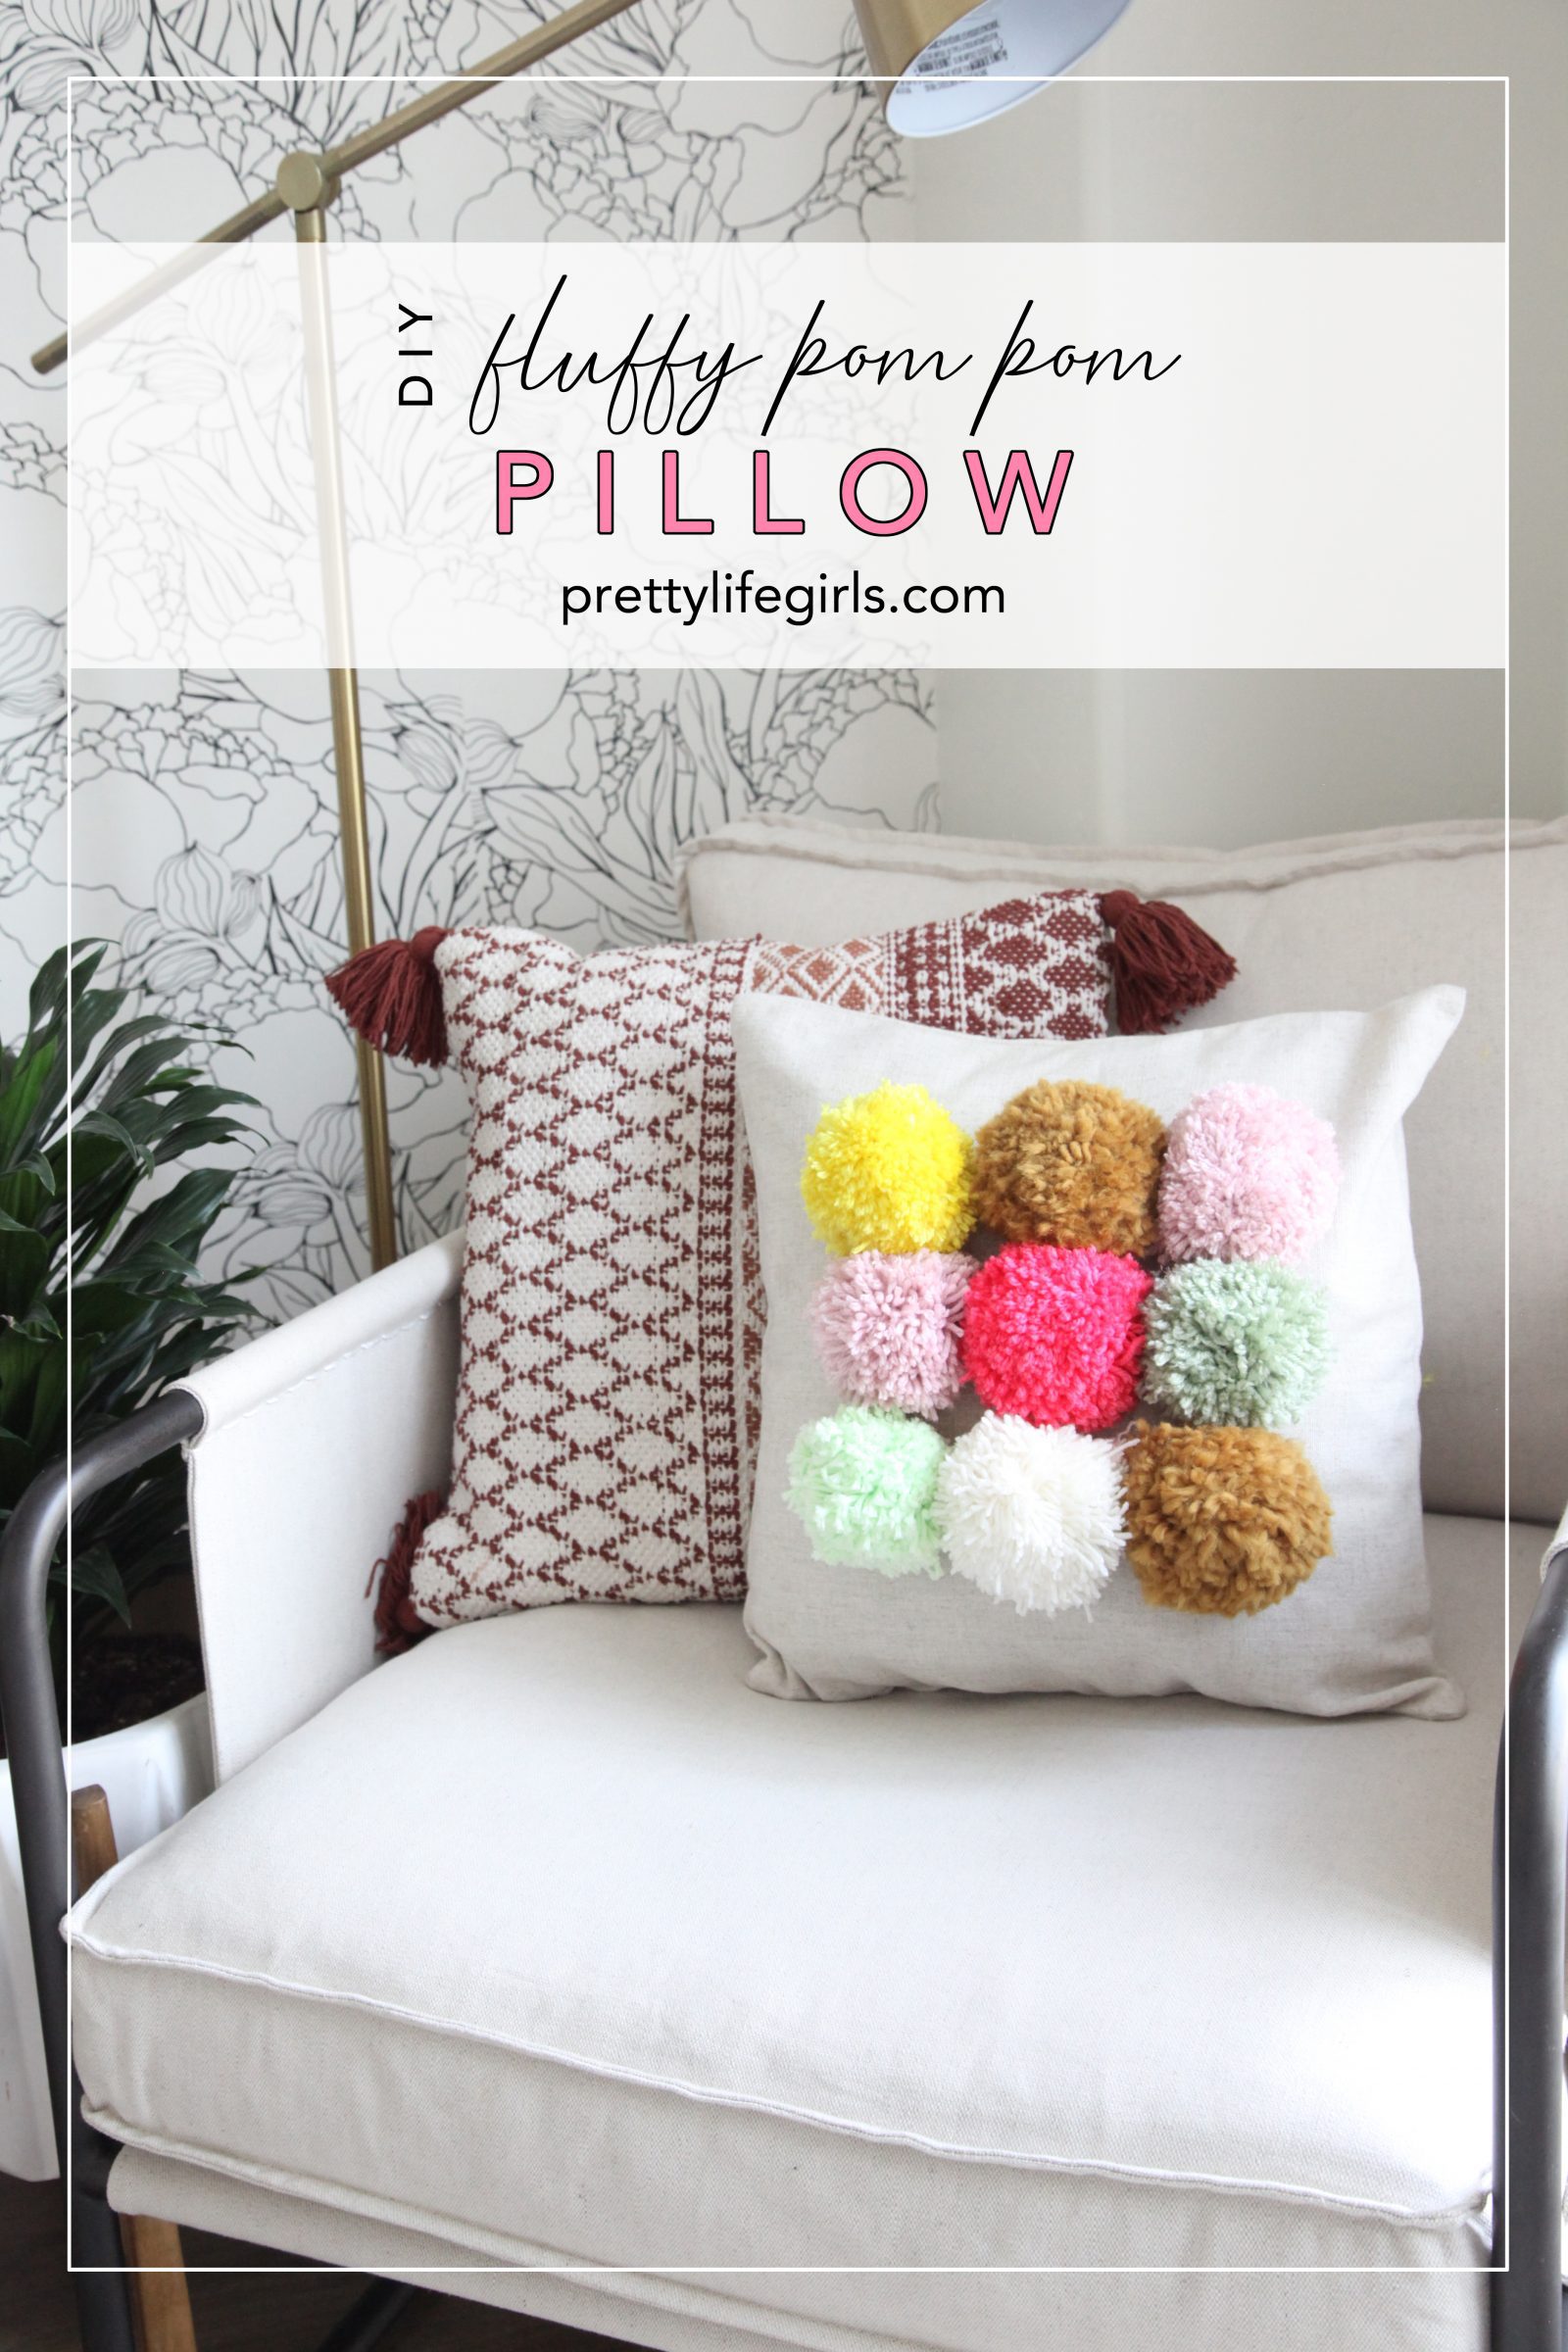 How to Make a Fluffy DIY Pom Pom Pillow + a tutorial featured by Top US Craft Blog + The Pretty Life Girls